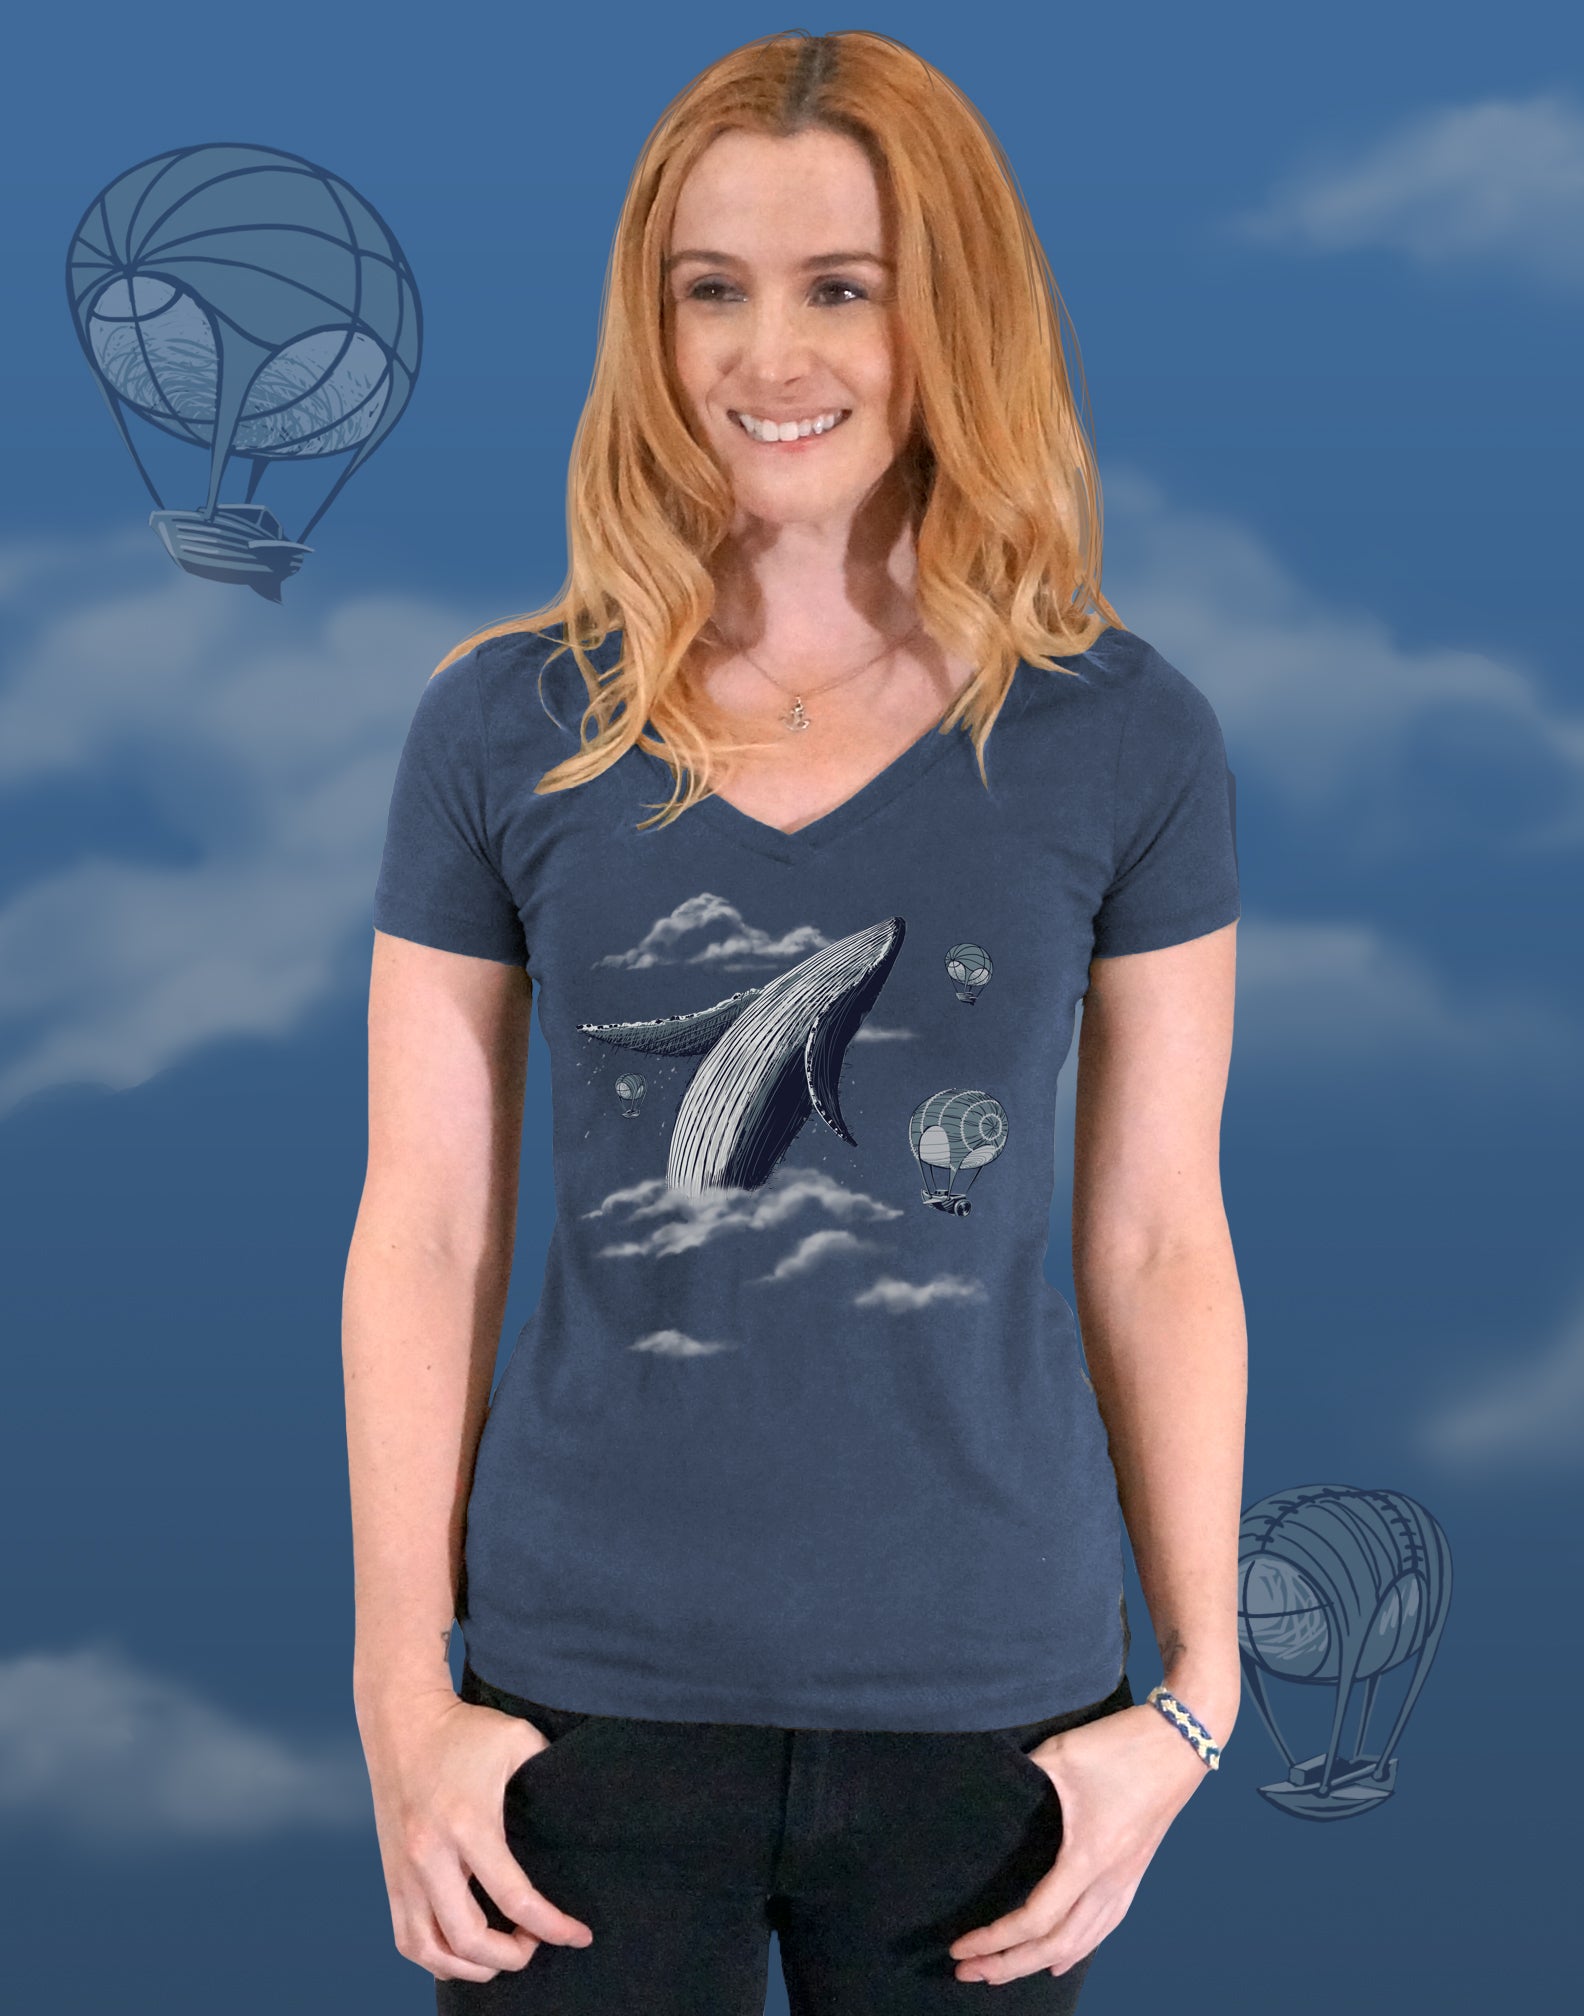 Whale Watching Junior Women's Fitted V-Neck (New Fit)